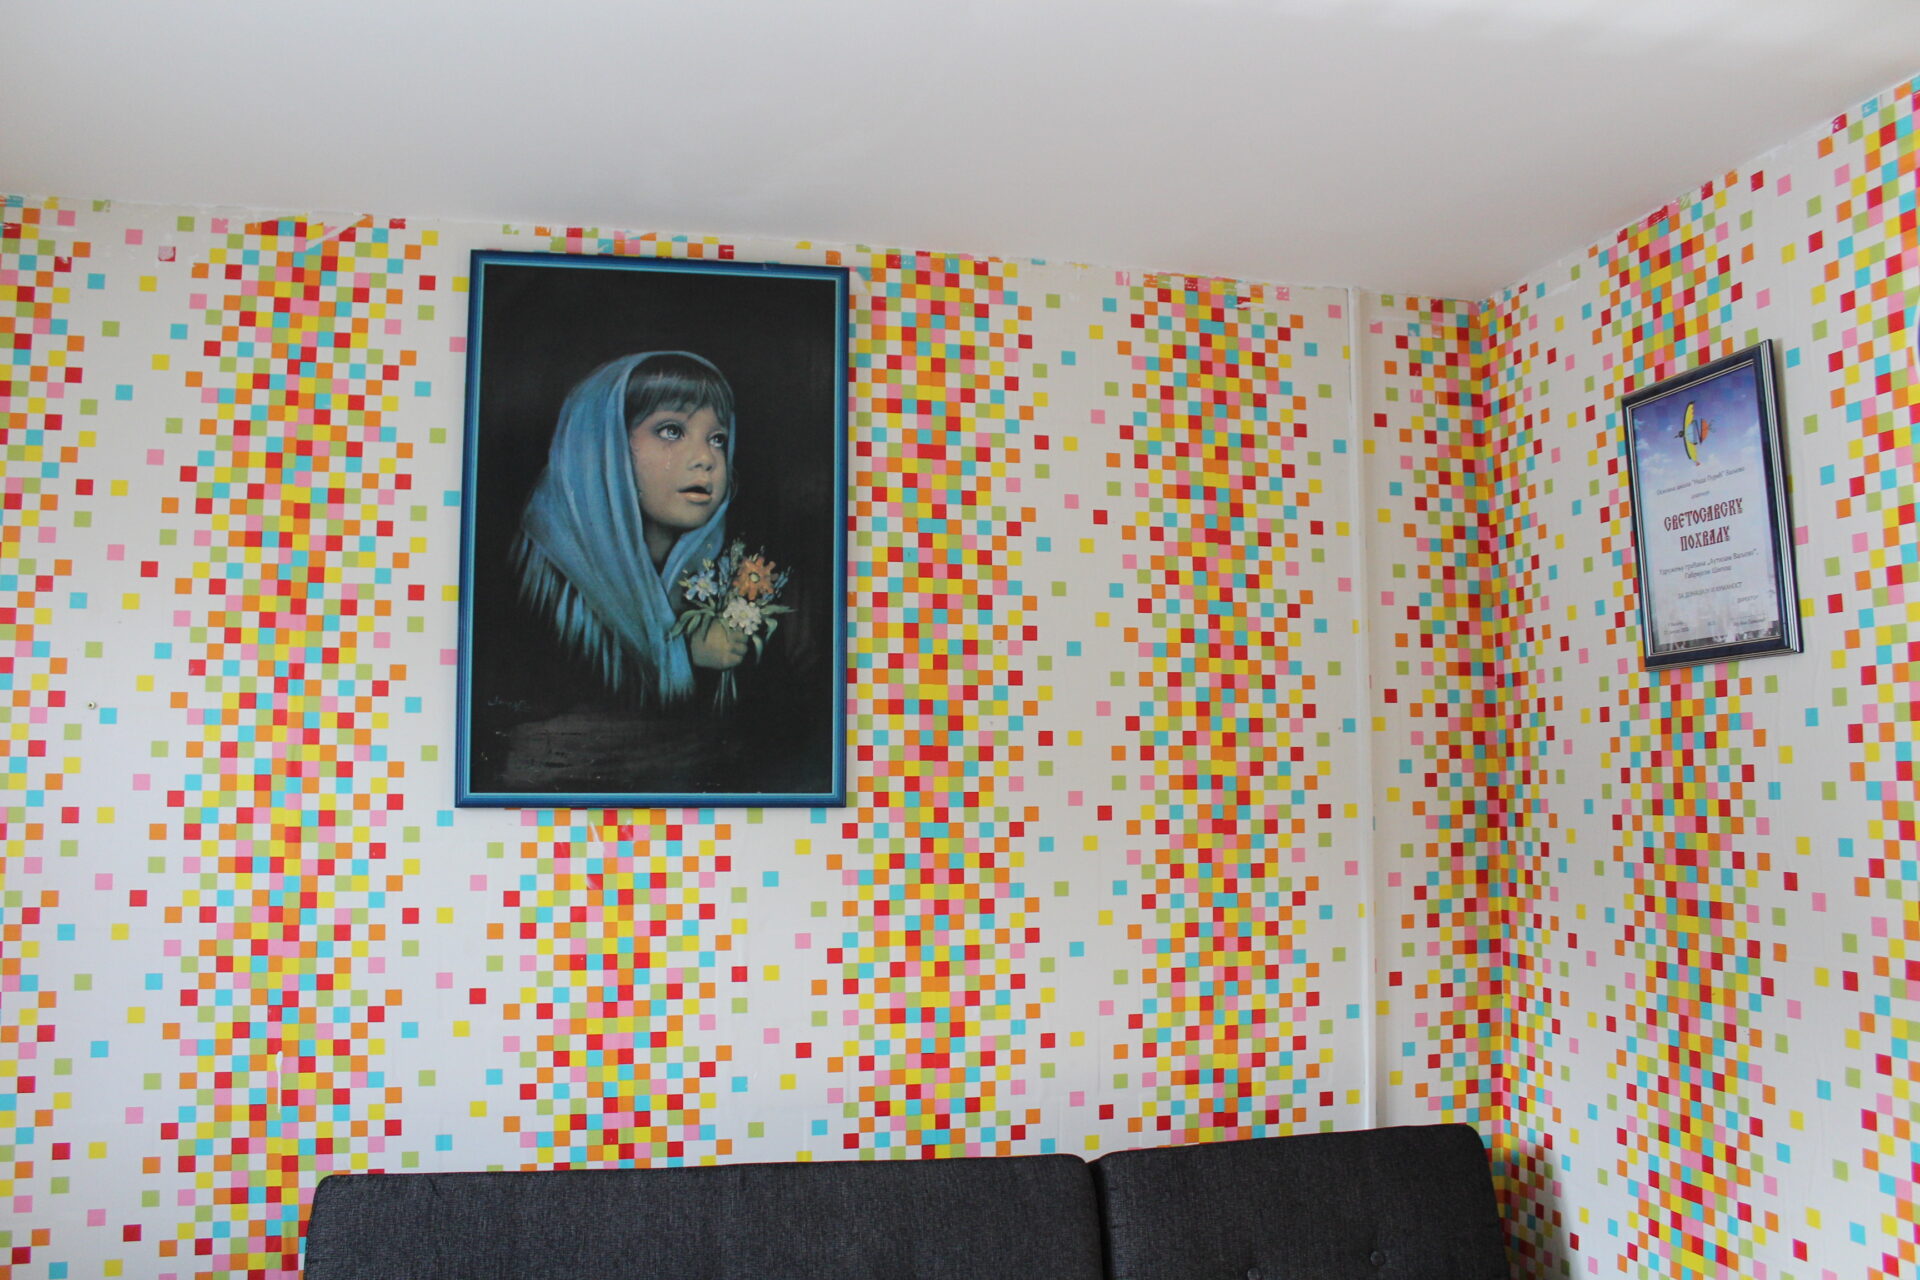 A view of a framed artwork mounted on a colorful wall above a gray couch